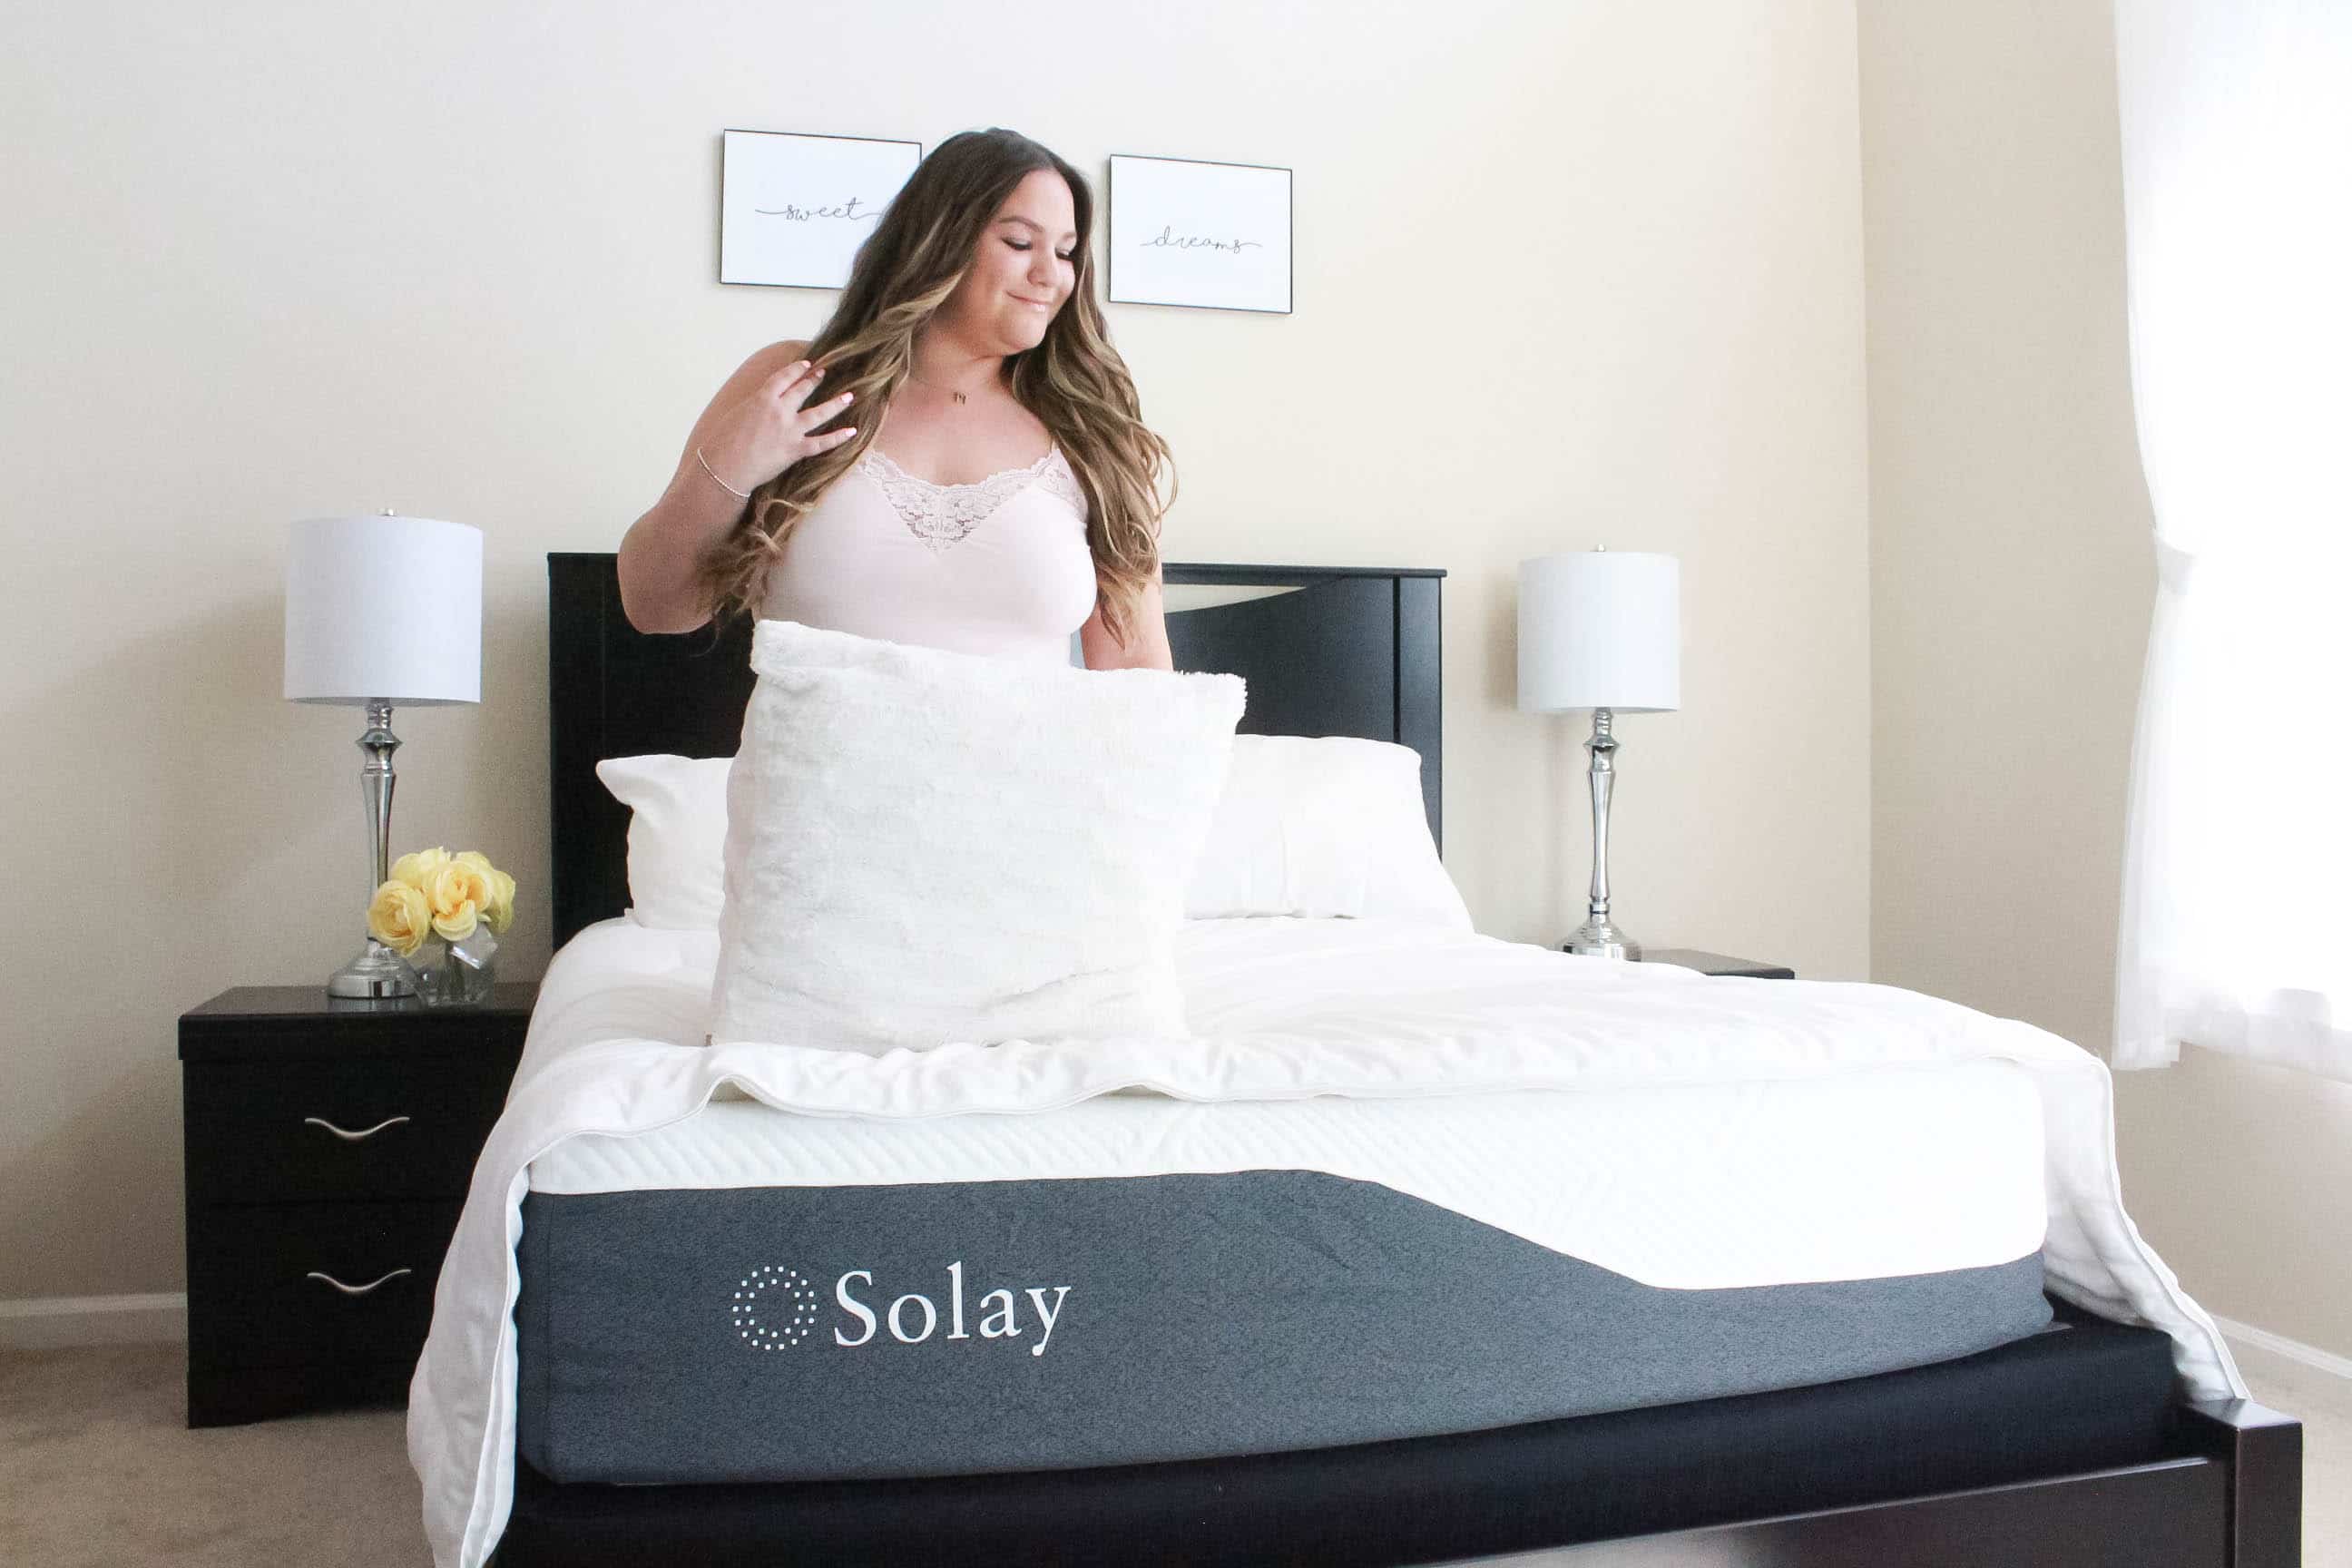 missyonmadison, missyonmadion blog, missyonmadison instagram, solay sleep, solay sleep review, solay sleep mattress, mattress review, casper mattress, memory foam mattress, mattress reviews, la blogger, lifestyle blogger, home decor goals, bedroom decor, home decor, bedding review, 